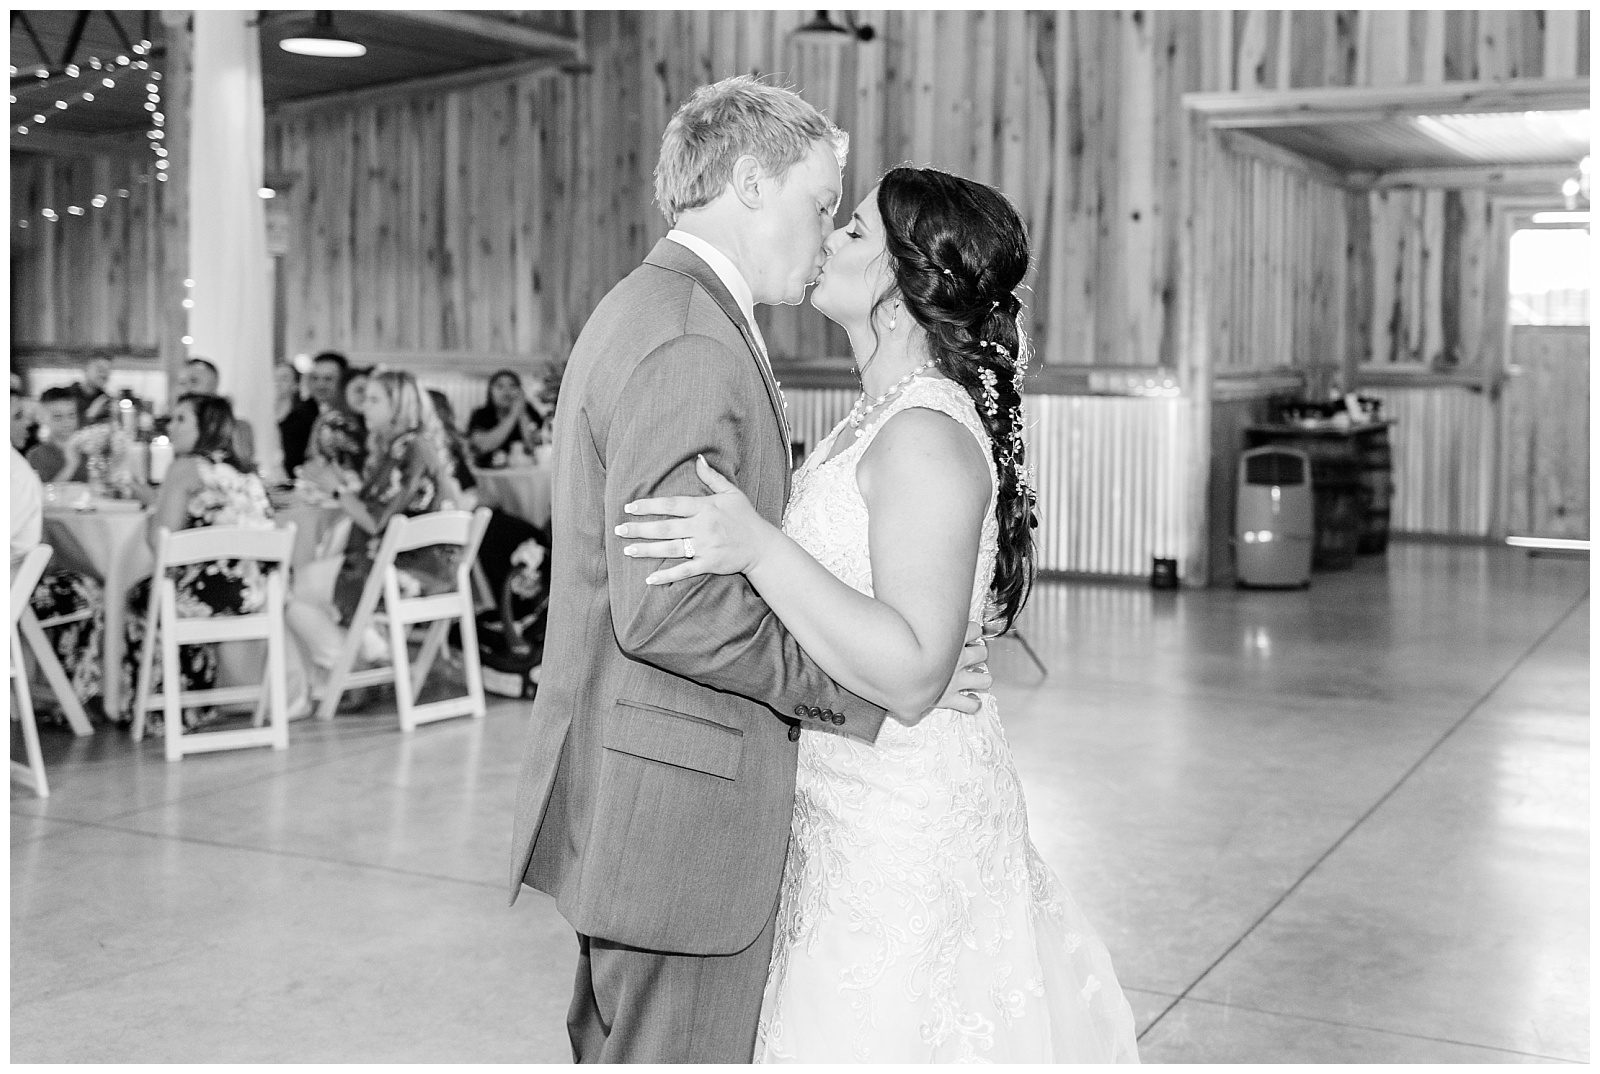 bride and groom first dance in rustic barn wedding